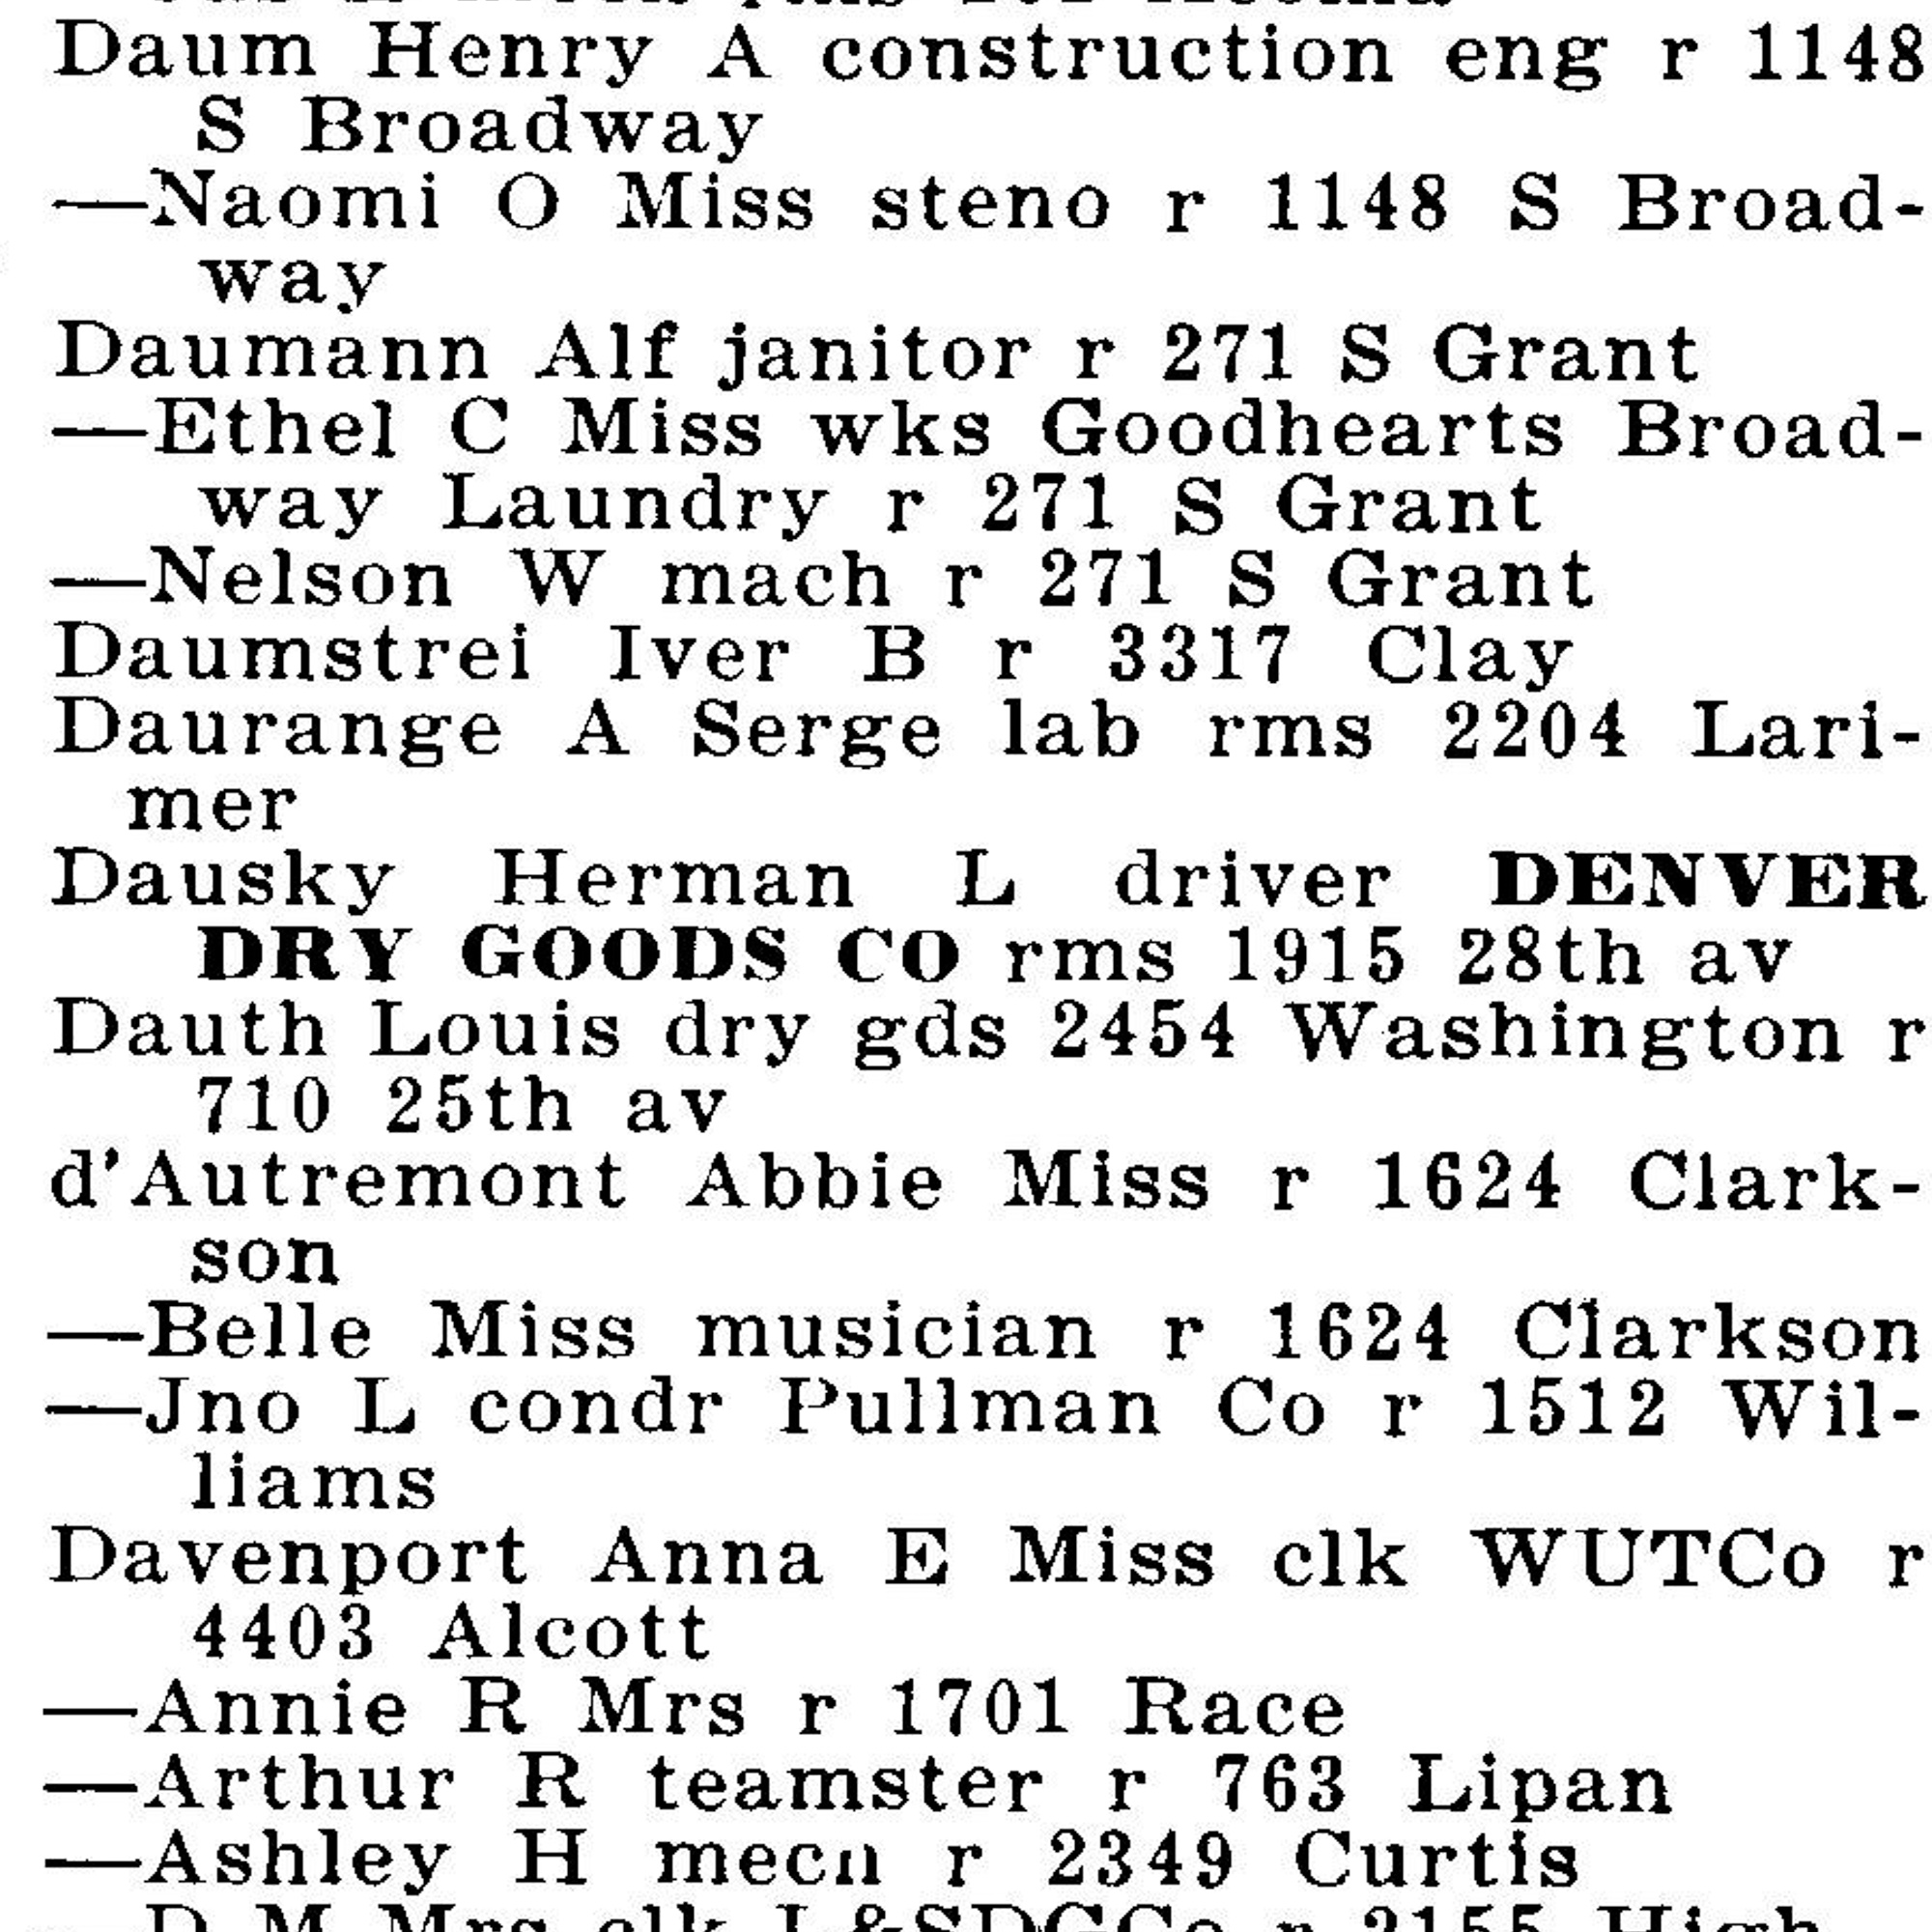 Dauth Family Archive - 1920 - Denver Directory - Entry For Louis Dauth